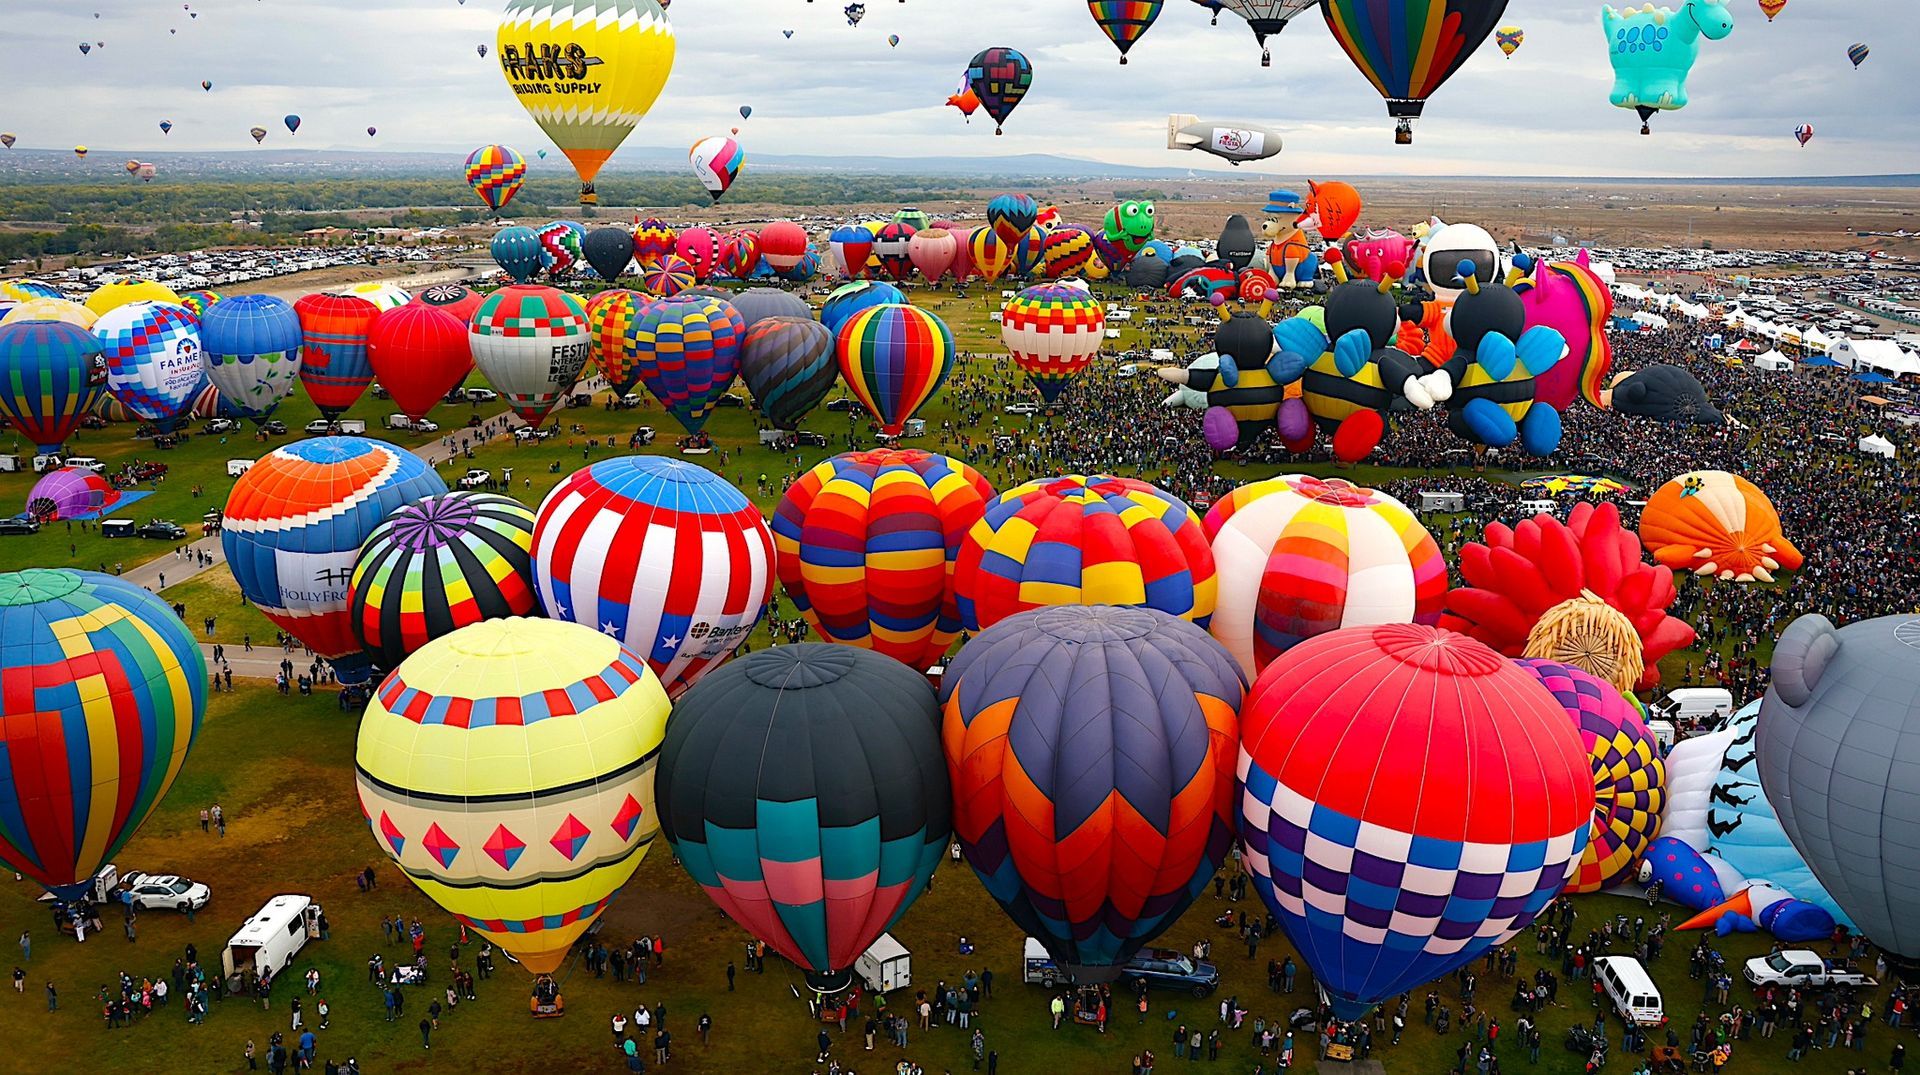 
World's Largest Hot Air Balloon Festival, world record in Albuquerque, New Mexico